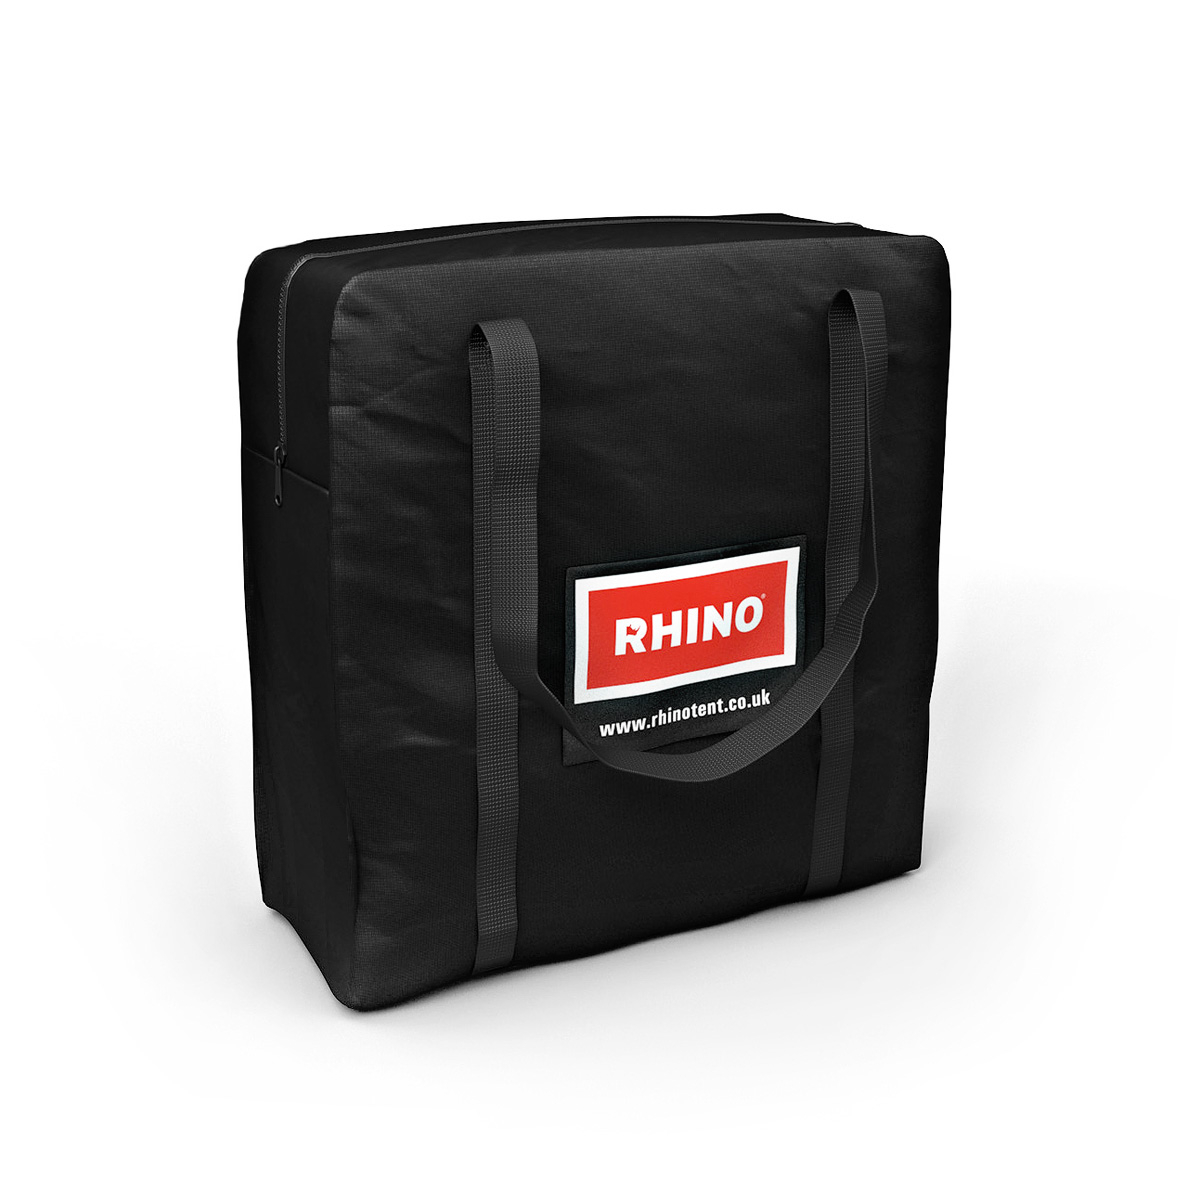 RHINO® Tent Graphics Bag For Storing And Transporting Printed Gazebo Graphics Between Events. Convenient Carry Handle & Zip For Safe Transport. UK Stock With Fast Delivery. 